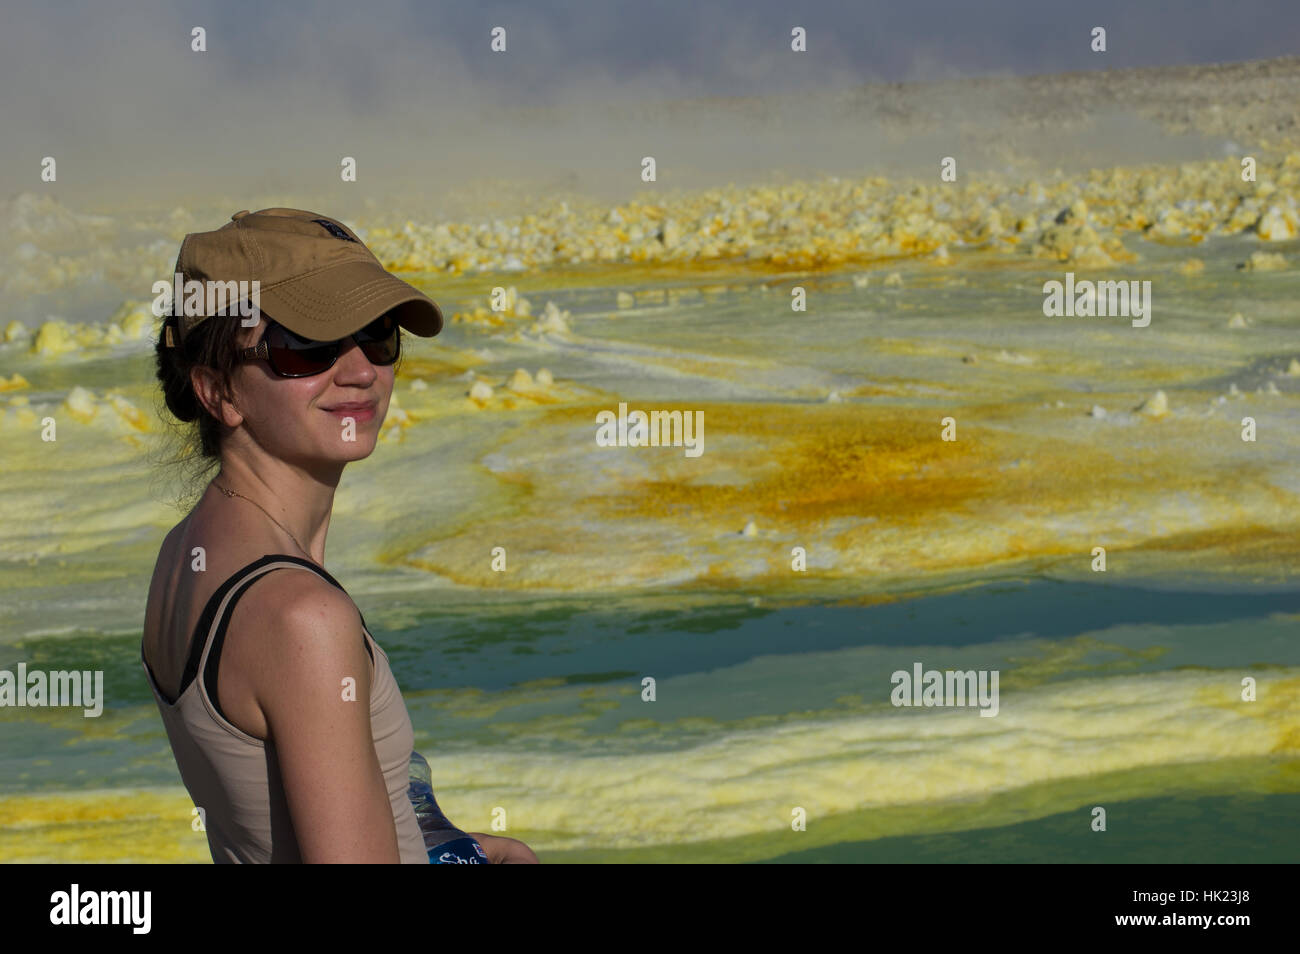 Woman in hat and sunglasses at Dalol, Danakil Depression, Ethiopia and the vivid yellows and green of the strange crystal shapes Stock Photo